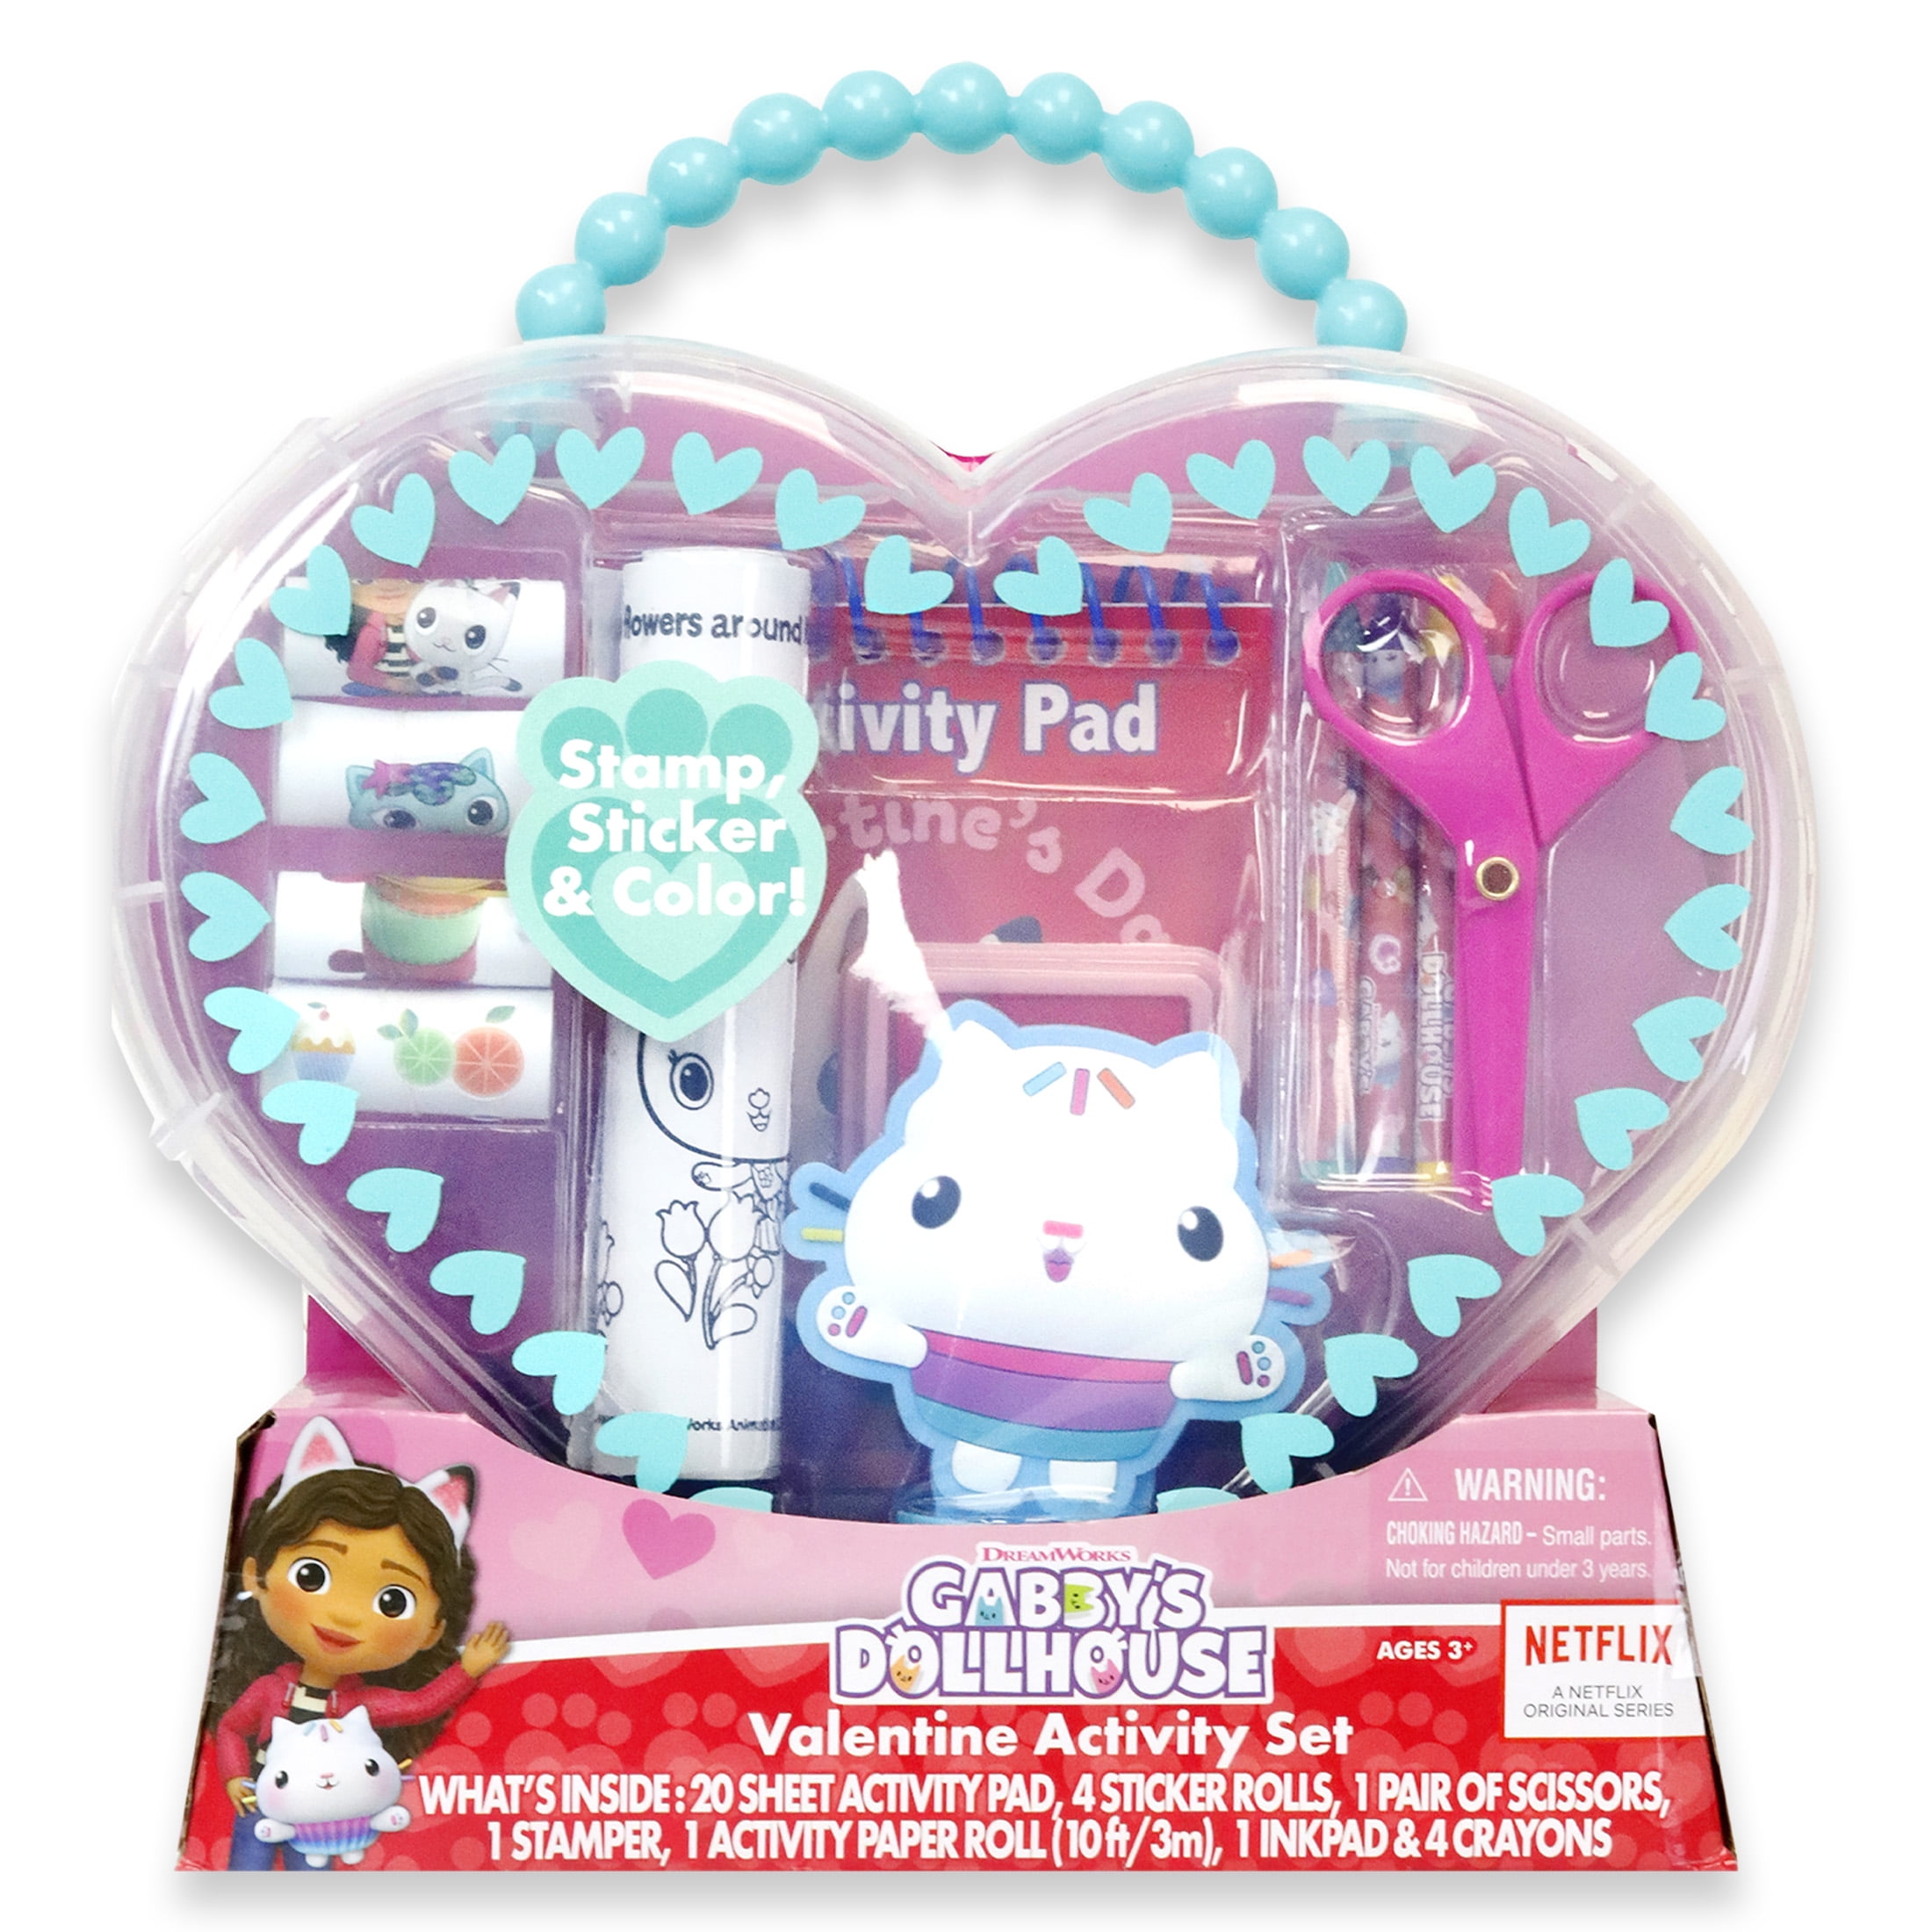 Gabby's Dollhouse Deluxe Art & Craft Heart Activity Arts & Craft Set, for Female Child Ages 3+